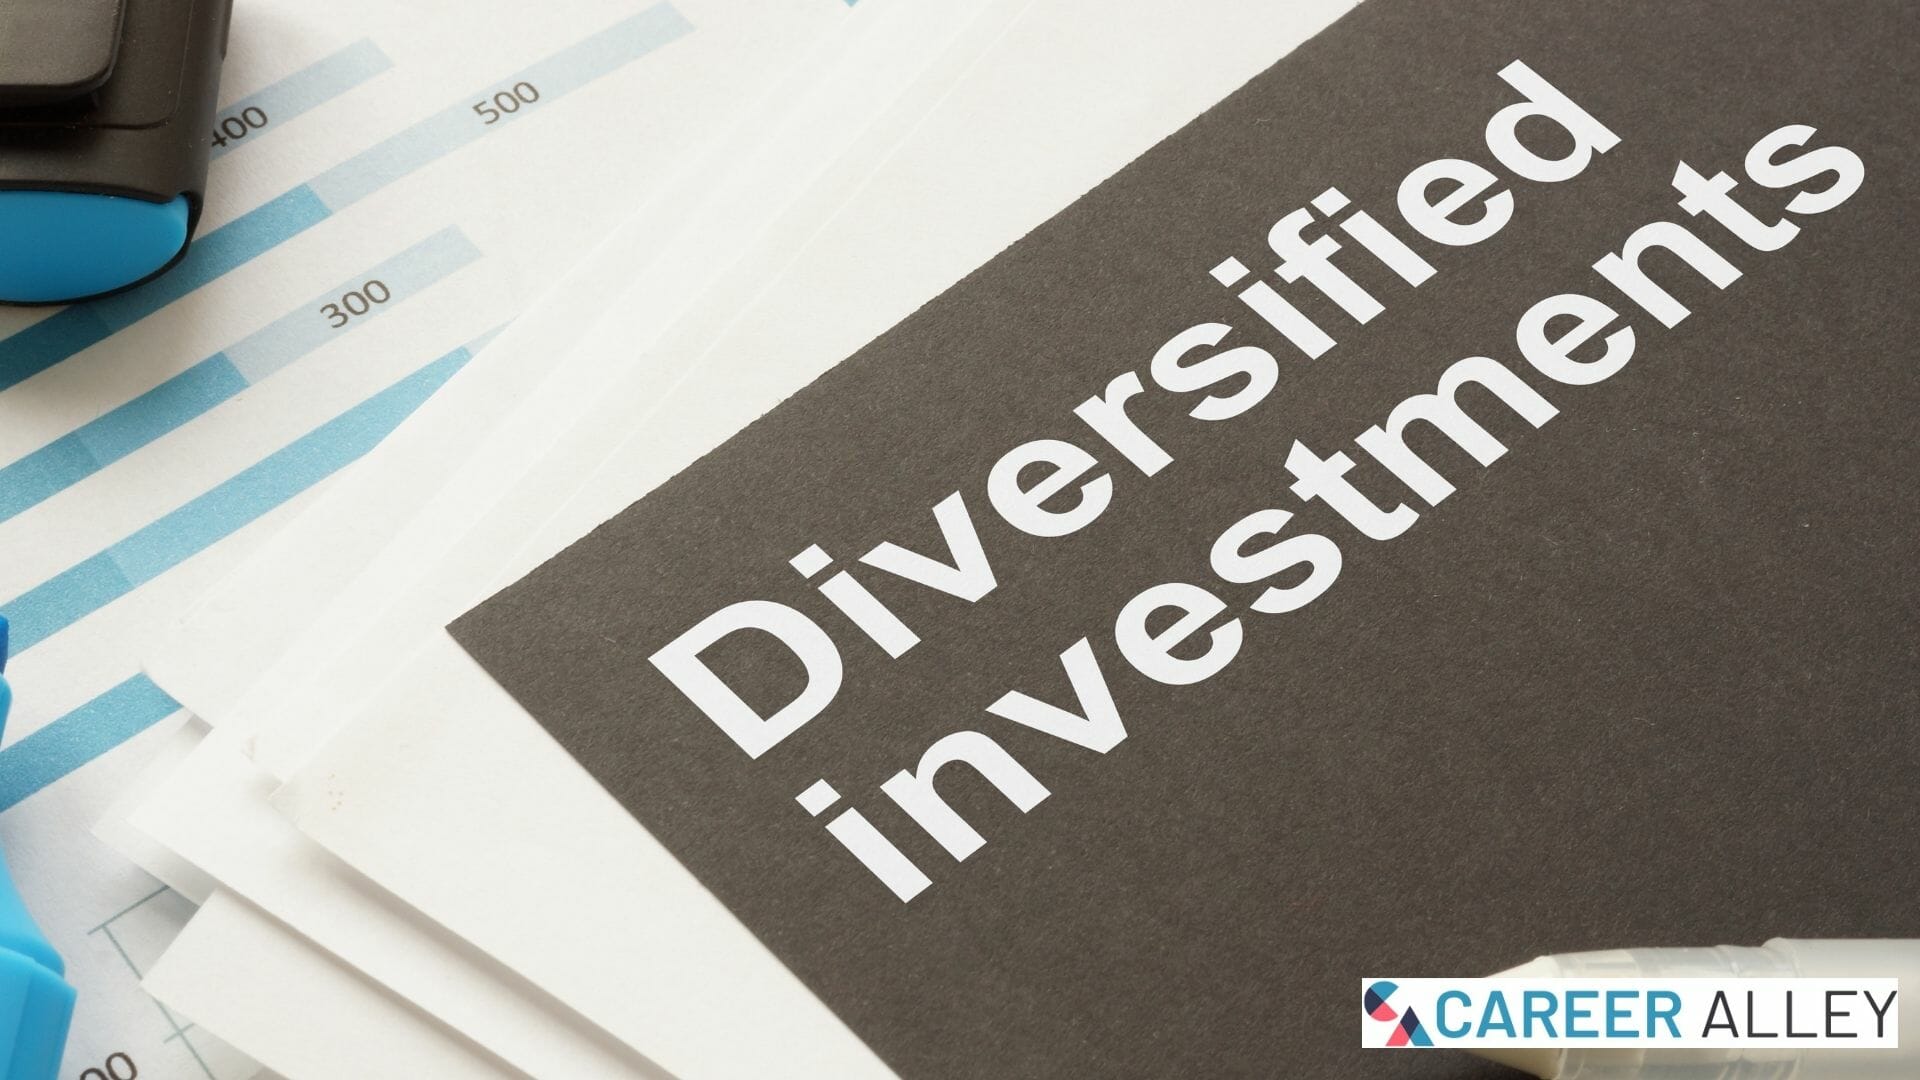 diversified investments